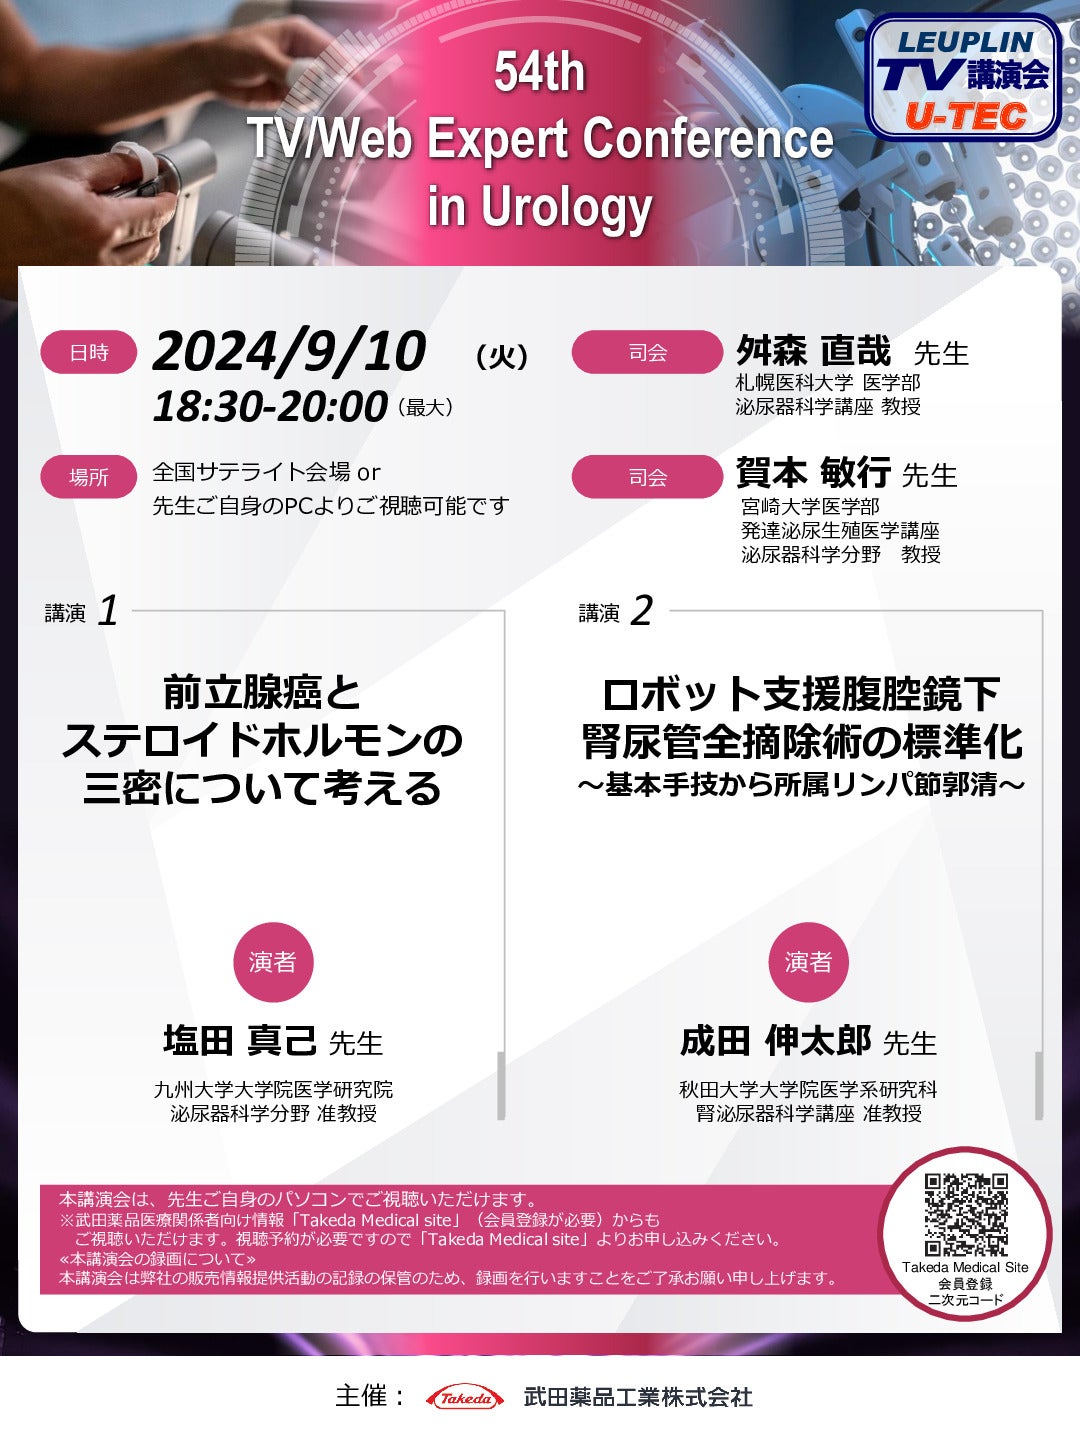 54th TV/Web Expert Conference in Urology(U-TEC)